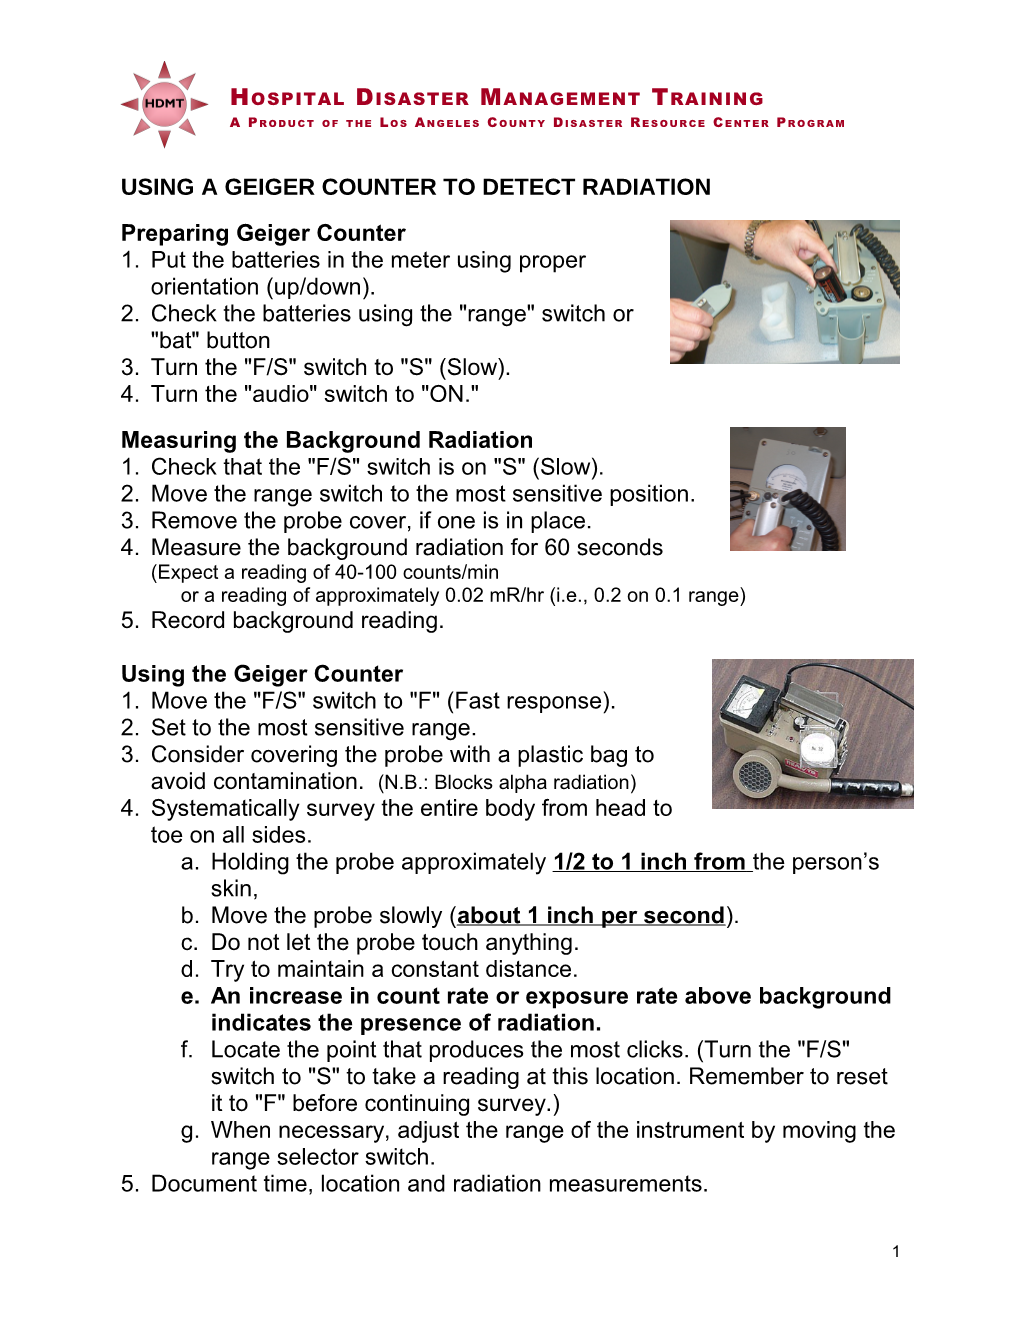 Using a Geiger Counter to Detect Radiation